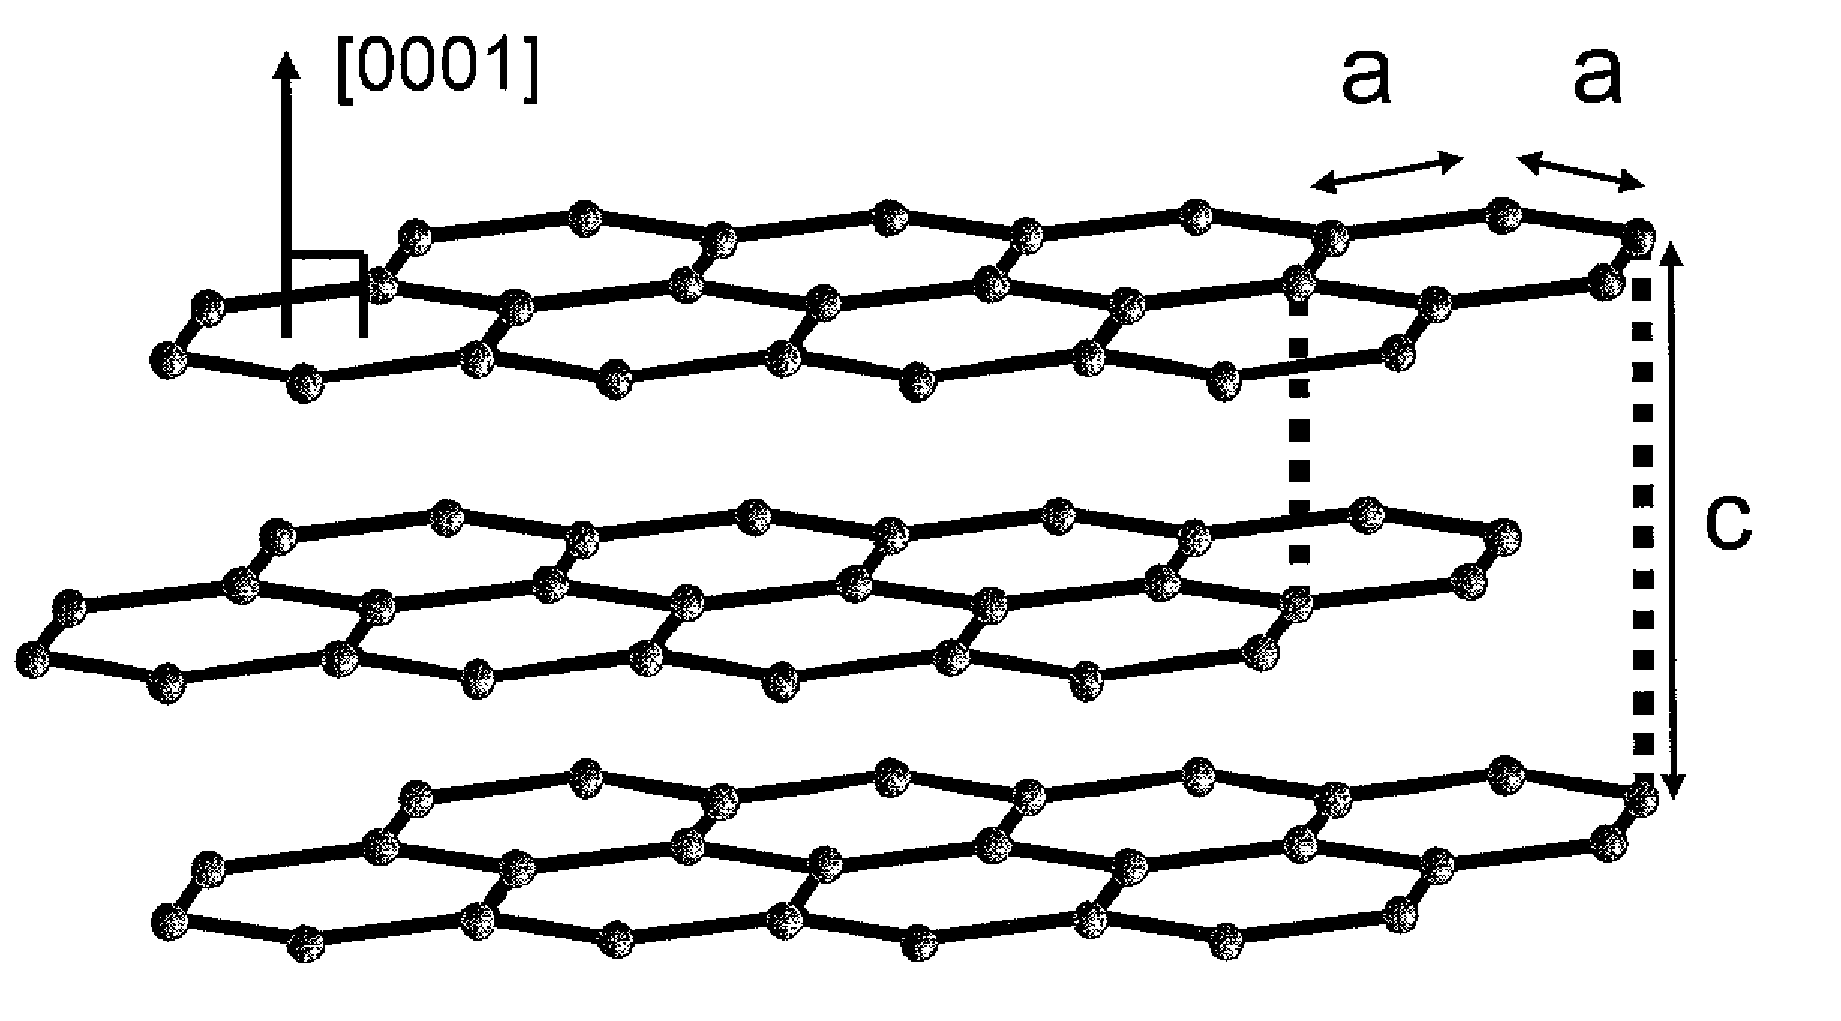 Method of fabricating graphene structures on substrates